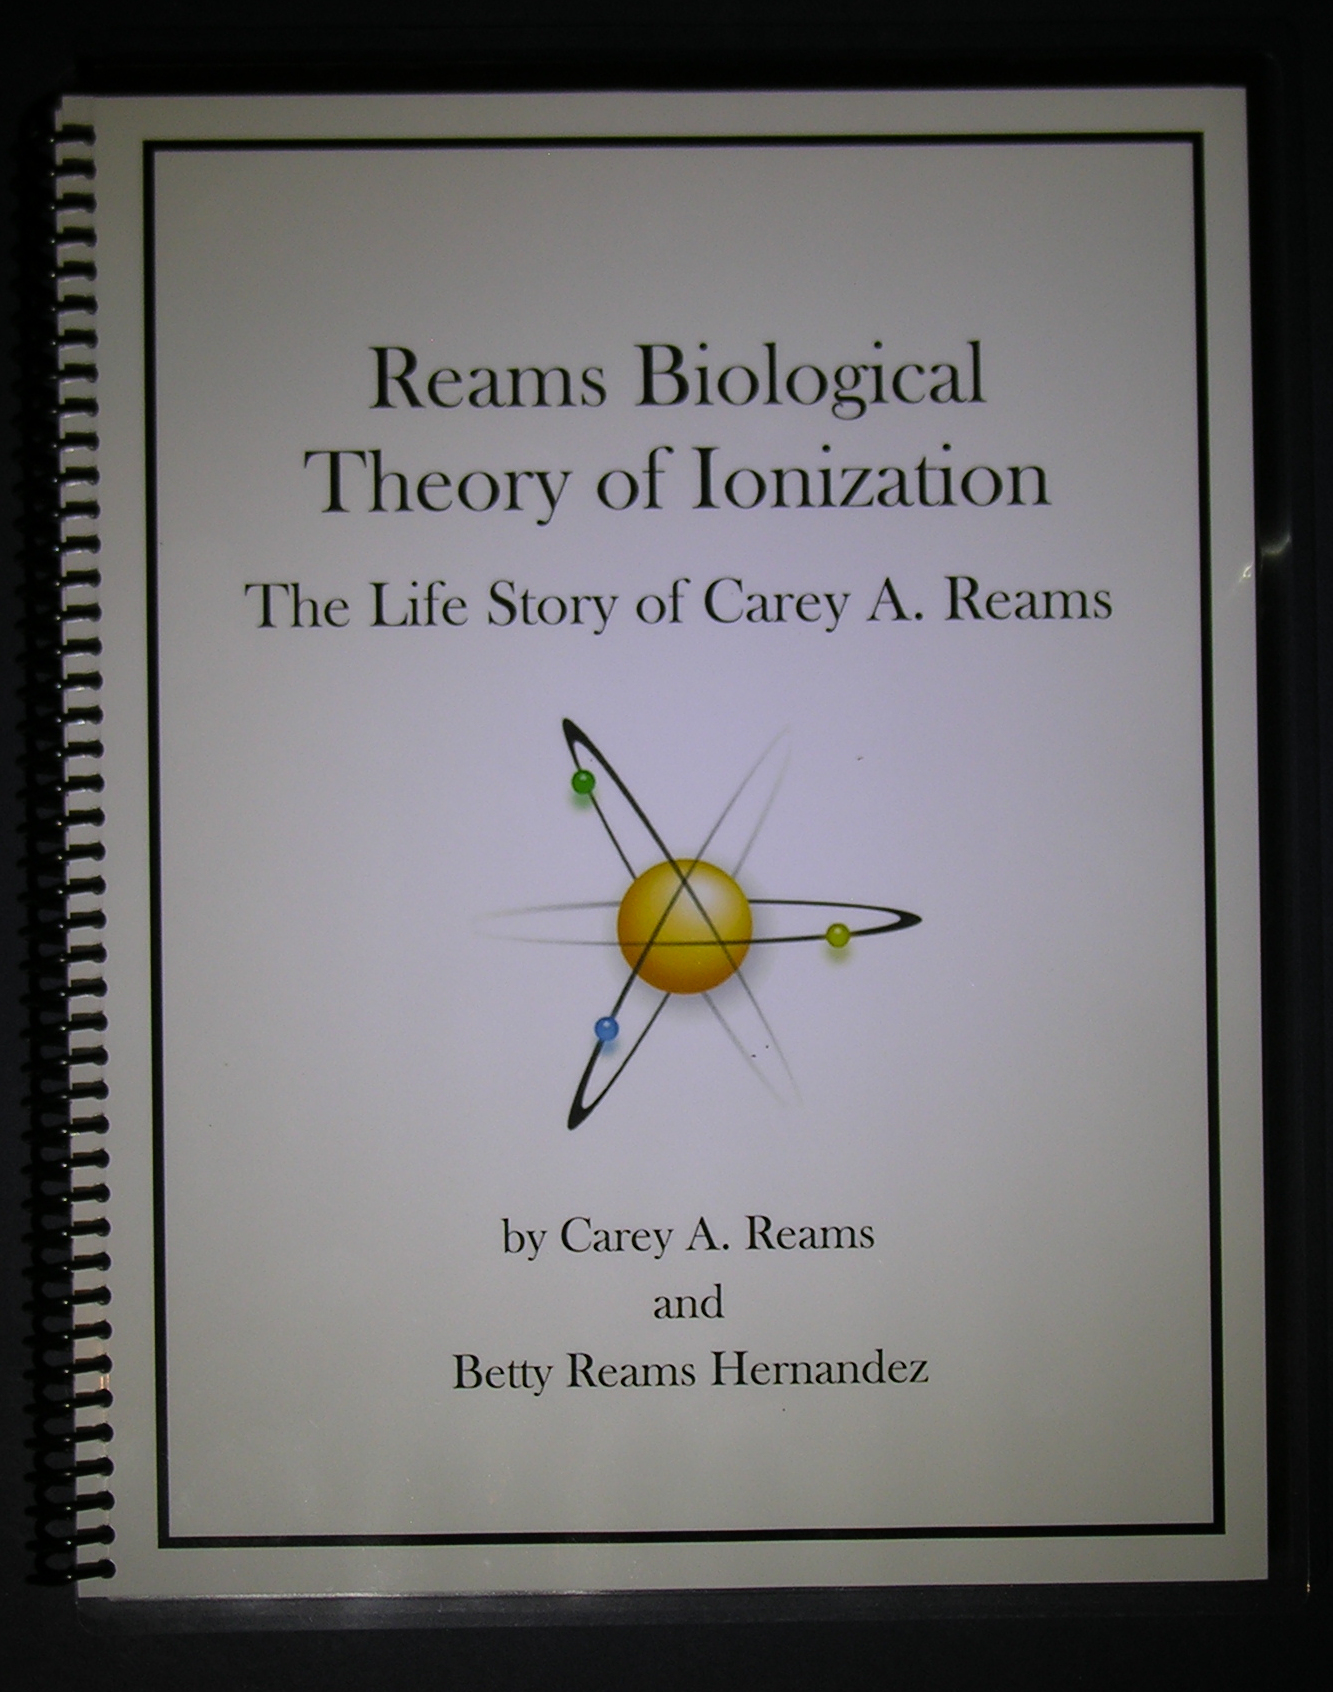 Reams Biological Theory of Ionization